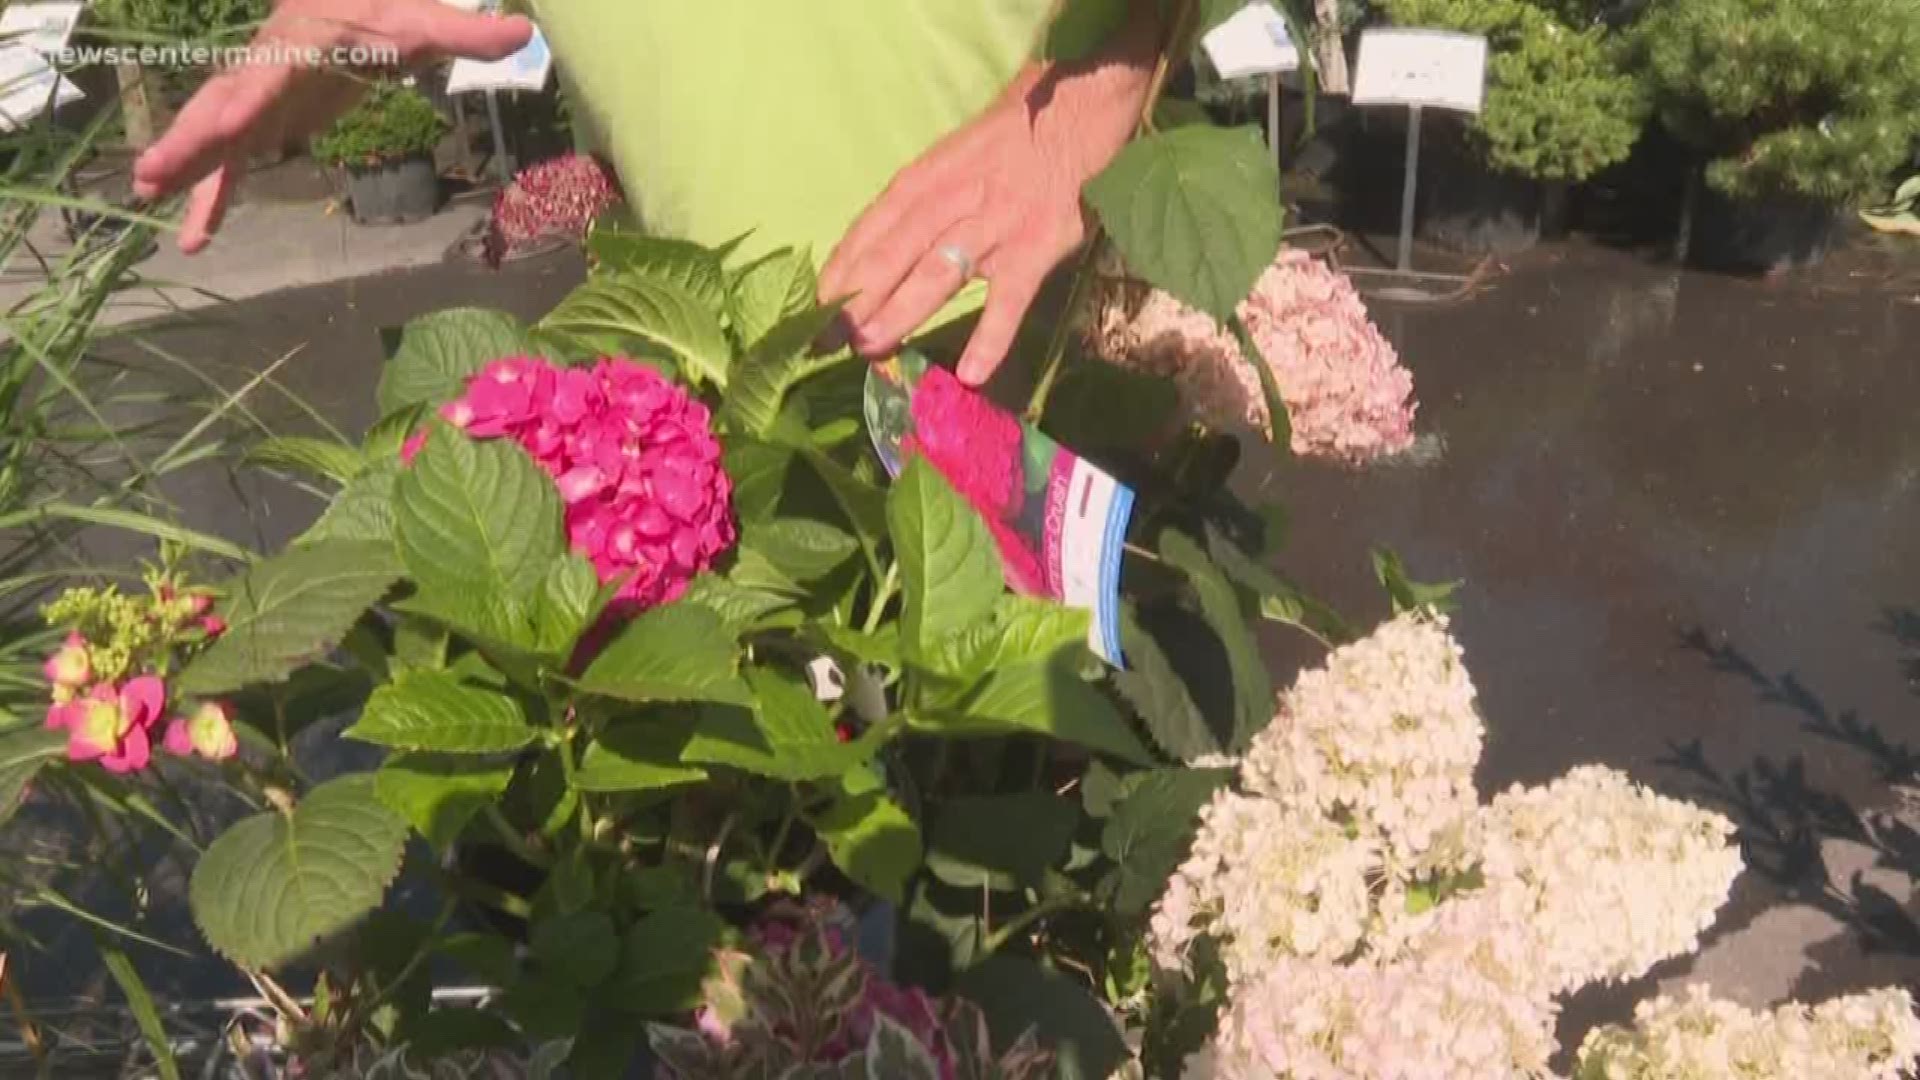 NEWS CENTER Maine's Cindy Williams looks at some new varieties of old favorites with Tom Estabrook of Estabrook's in Yarmouth.